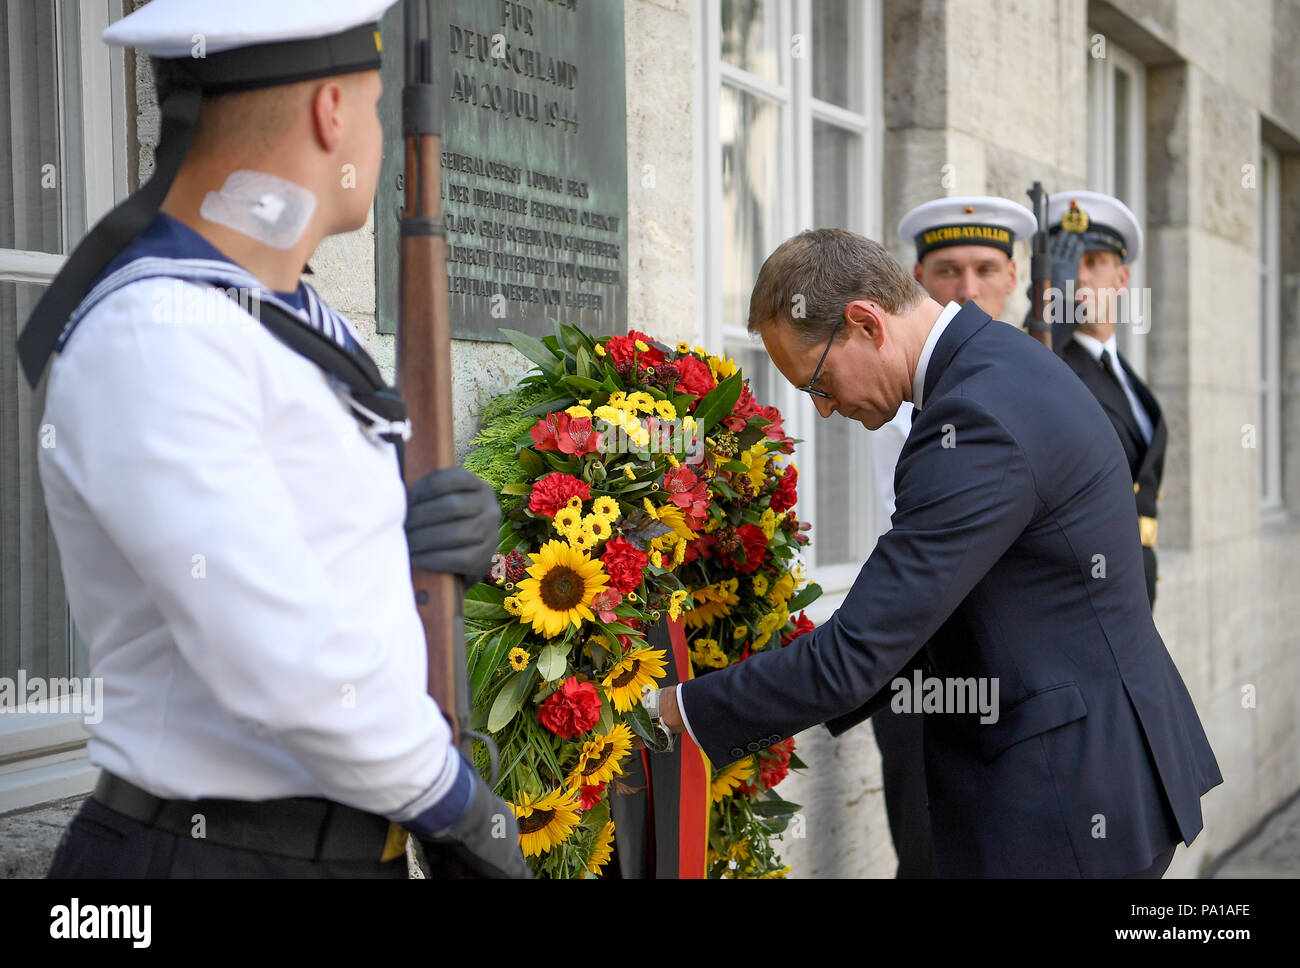 Image result for Berlin, Germany. 20th July, 2018. Michael Mueller (SPD), Mayor of Berlin, laying a wreath during the remembrance event on the 74th anniversary of the failed attempt against Adolf Hitler in